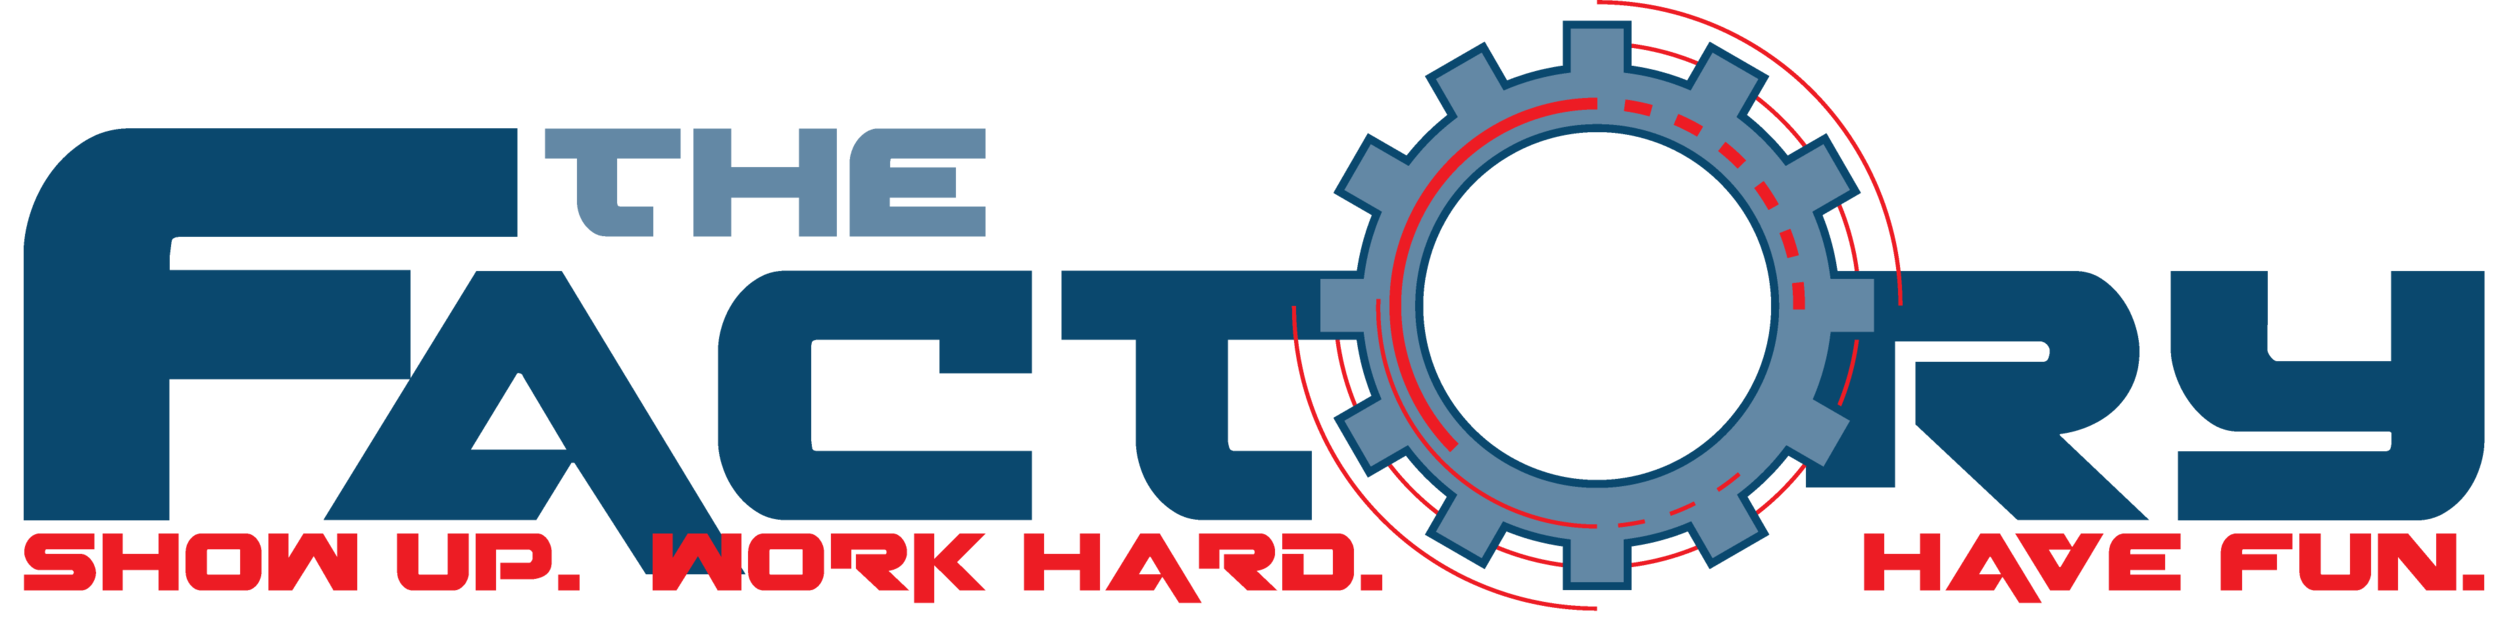 Factory Primary Logo.png